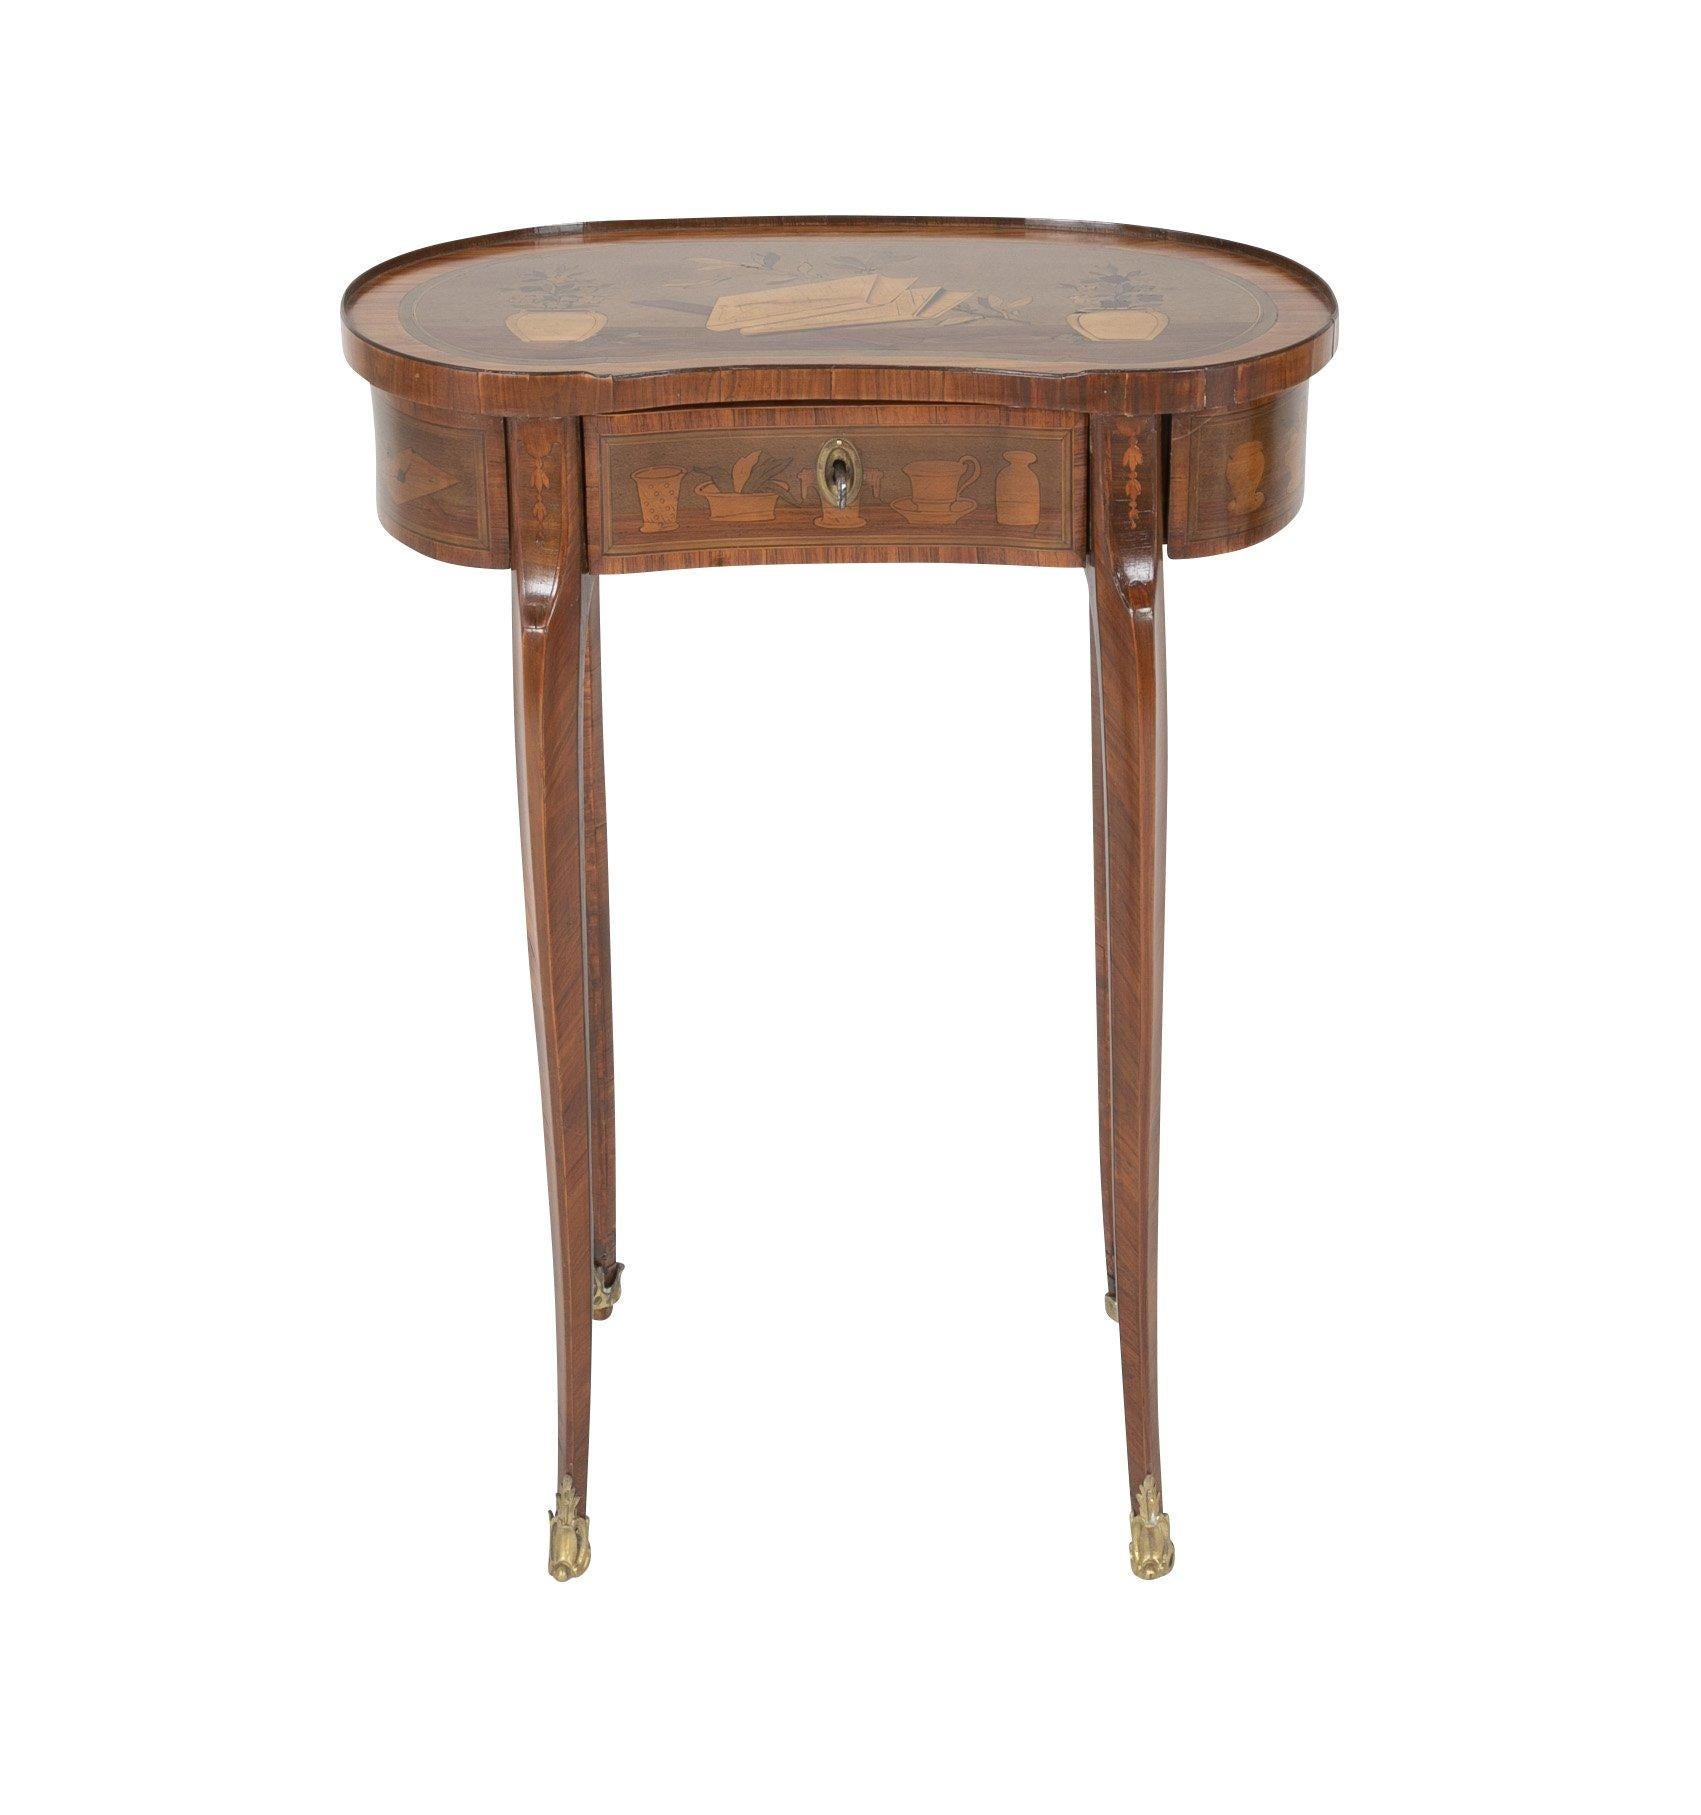 European Louis XV Kidney Form Marquetry Table After Charles Topino